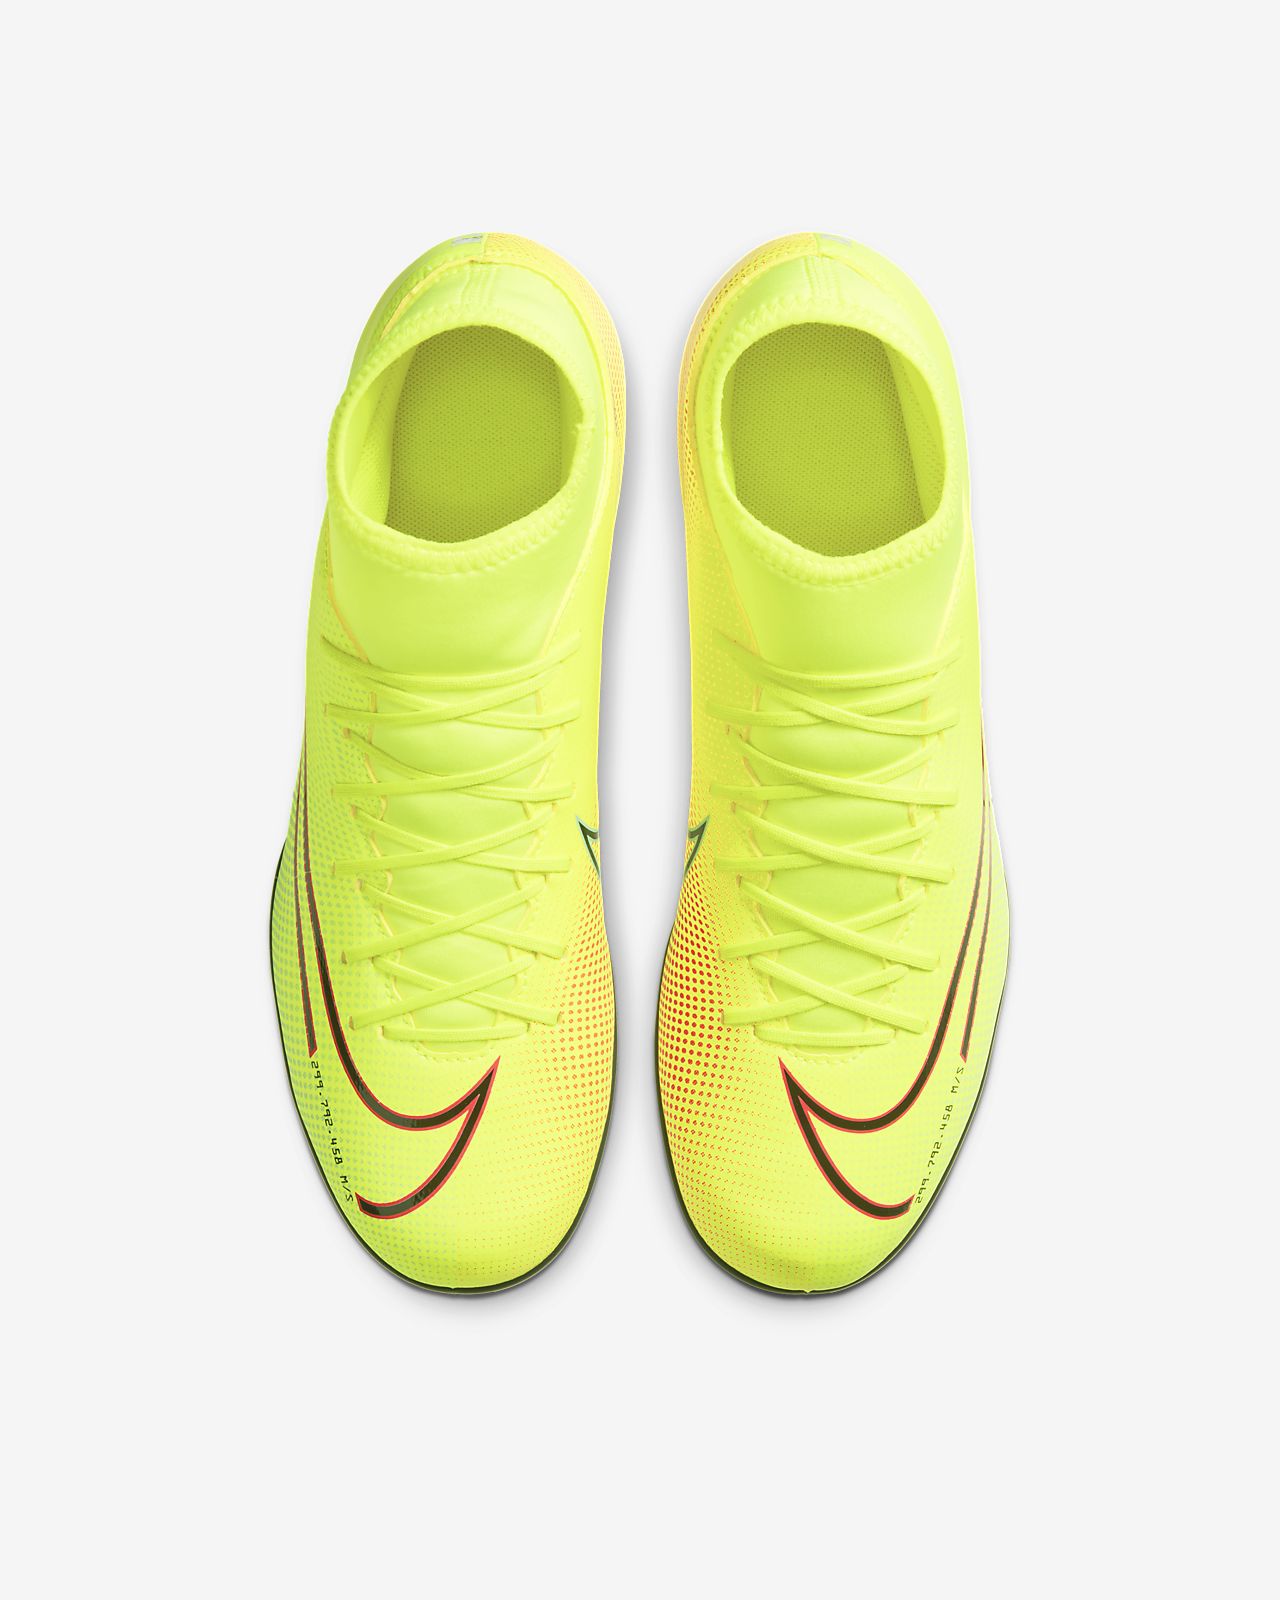 Nike Mercurial Superfly 7 Club MDS Turf Soccer Cleats.